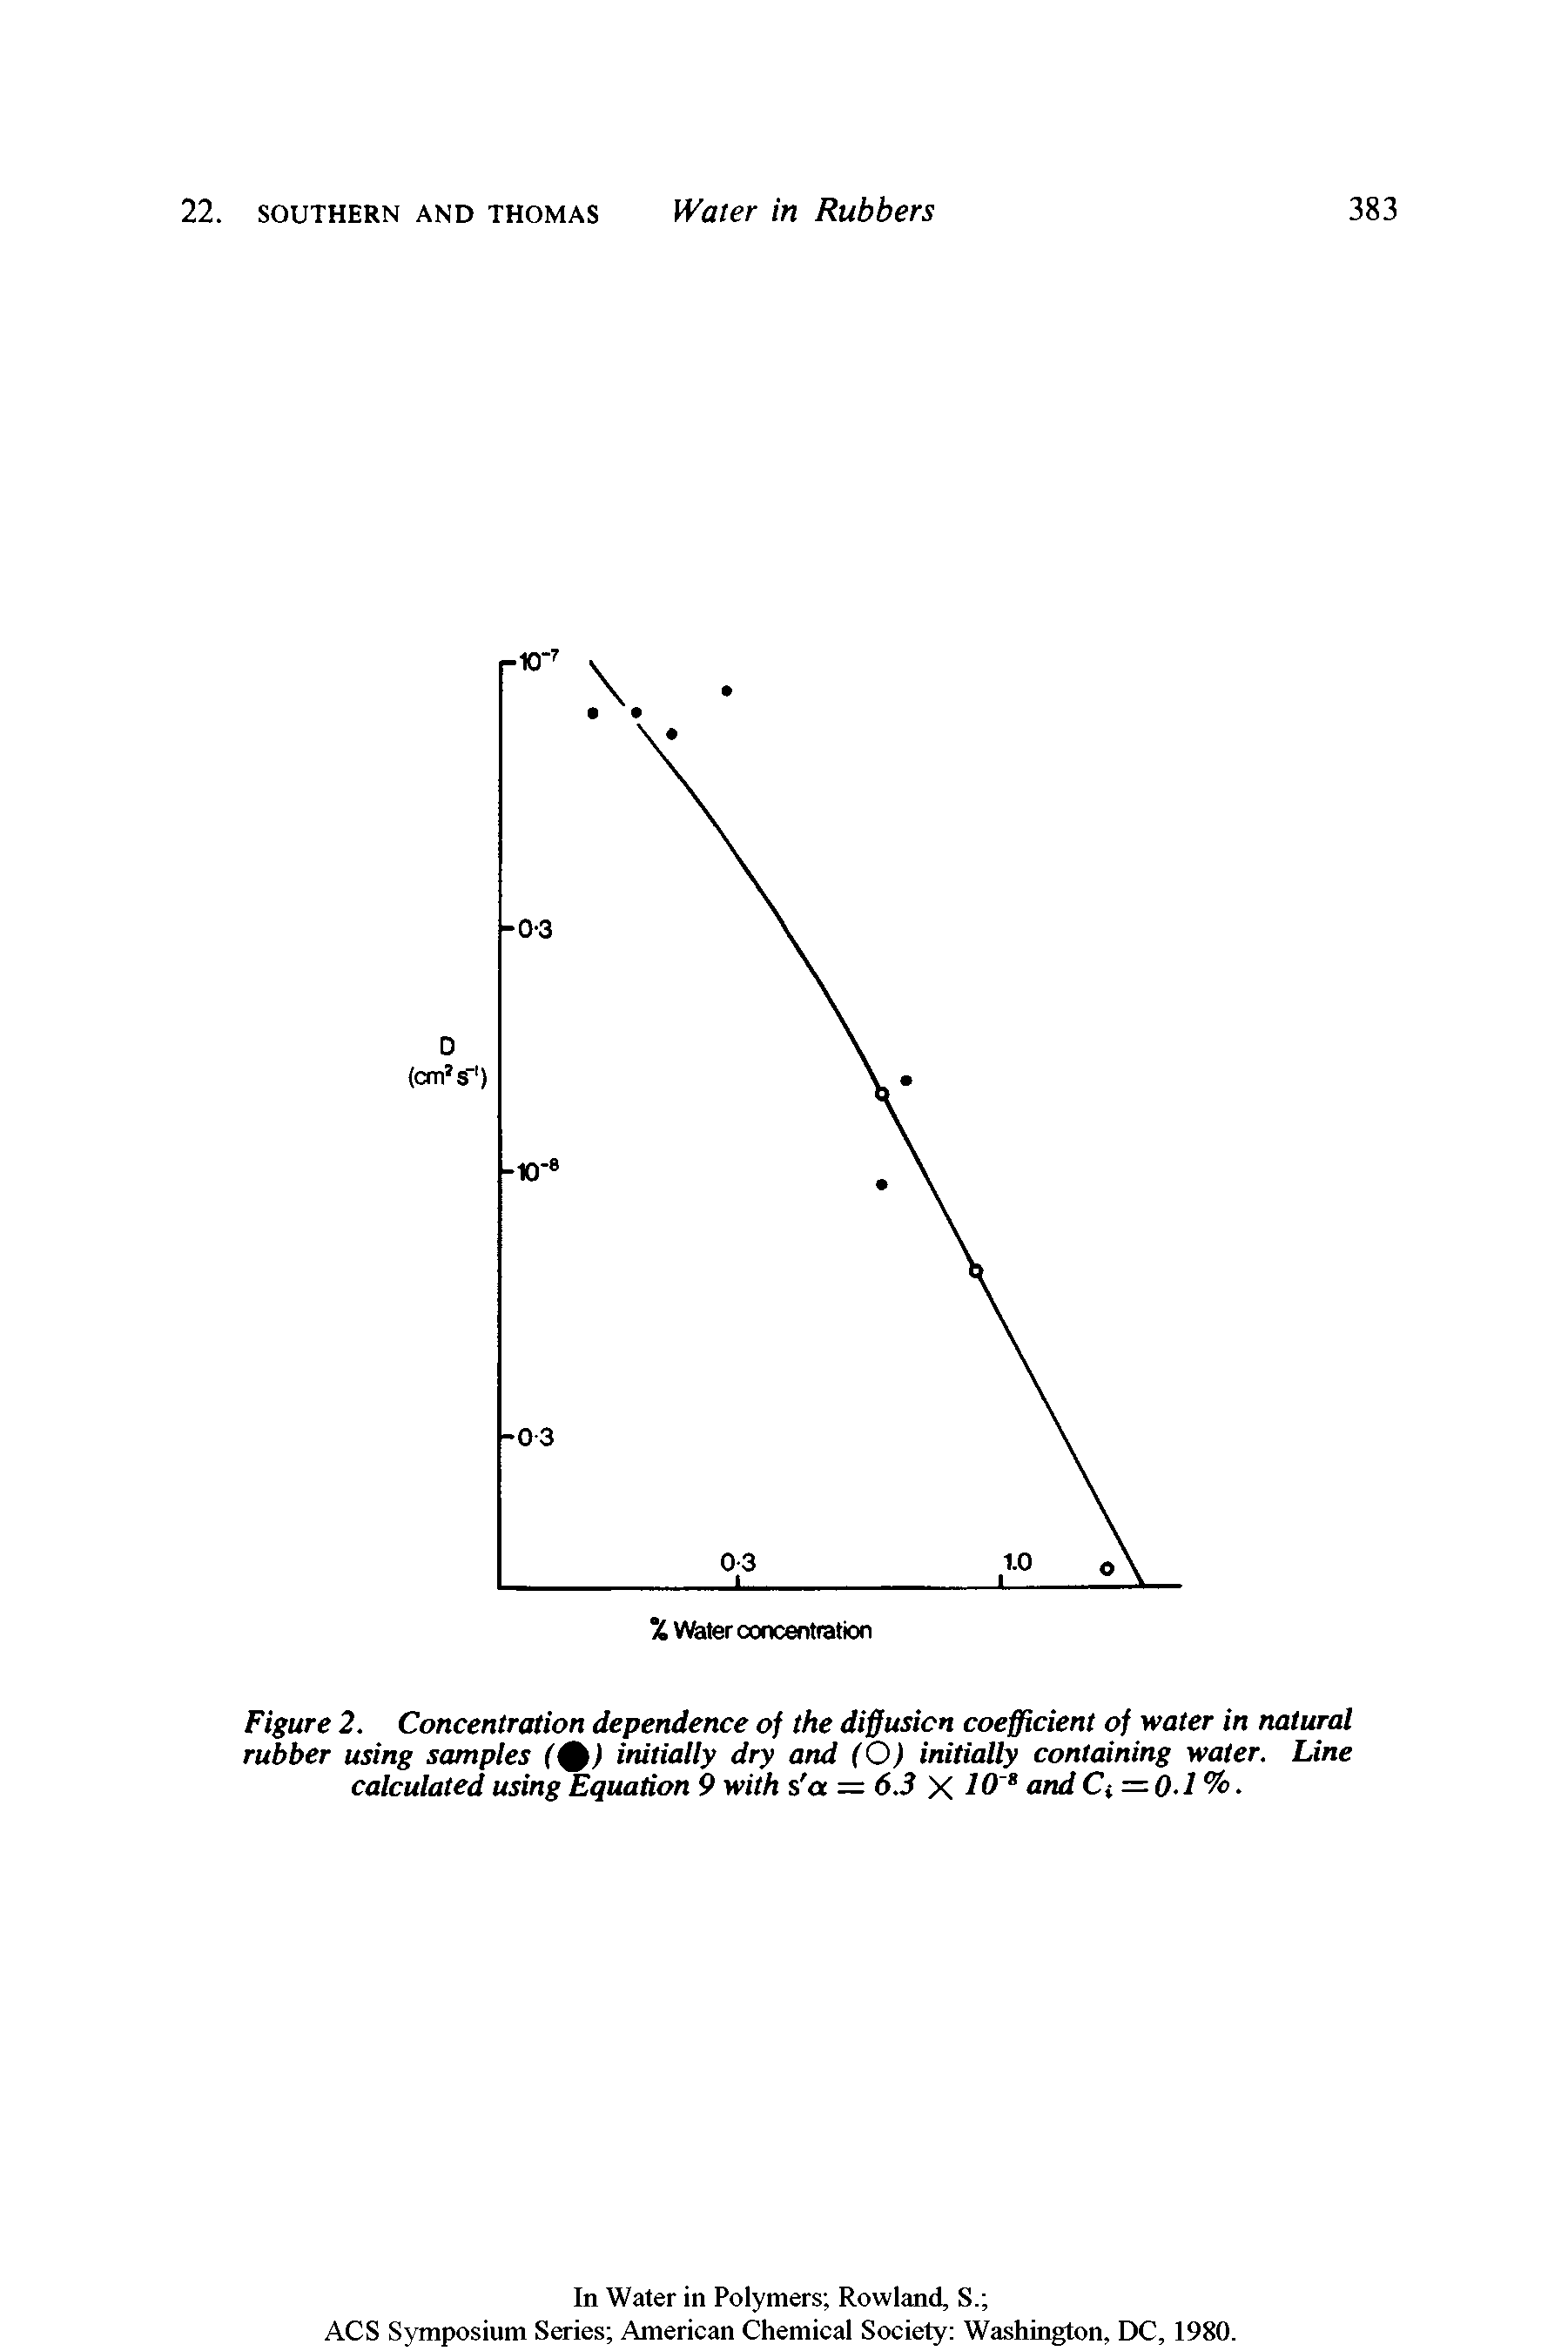 Figure 2. Concentration dependence of the diffusion coefficient of water in natural rubber using samples (%) initially dry and (O) initially containing water. Line calculated using Equation 9 with s a = 6.3 X 10" and Ci = 0.1%.